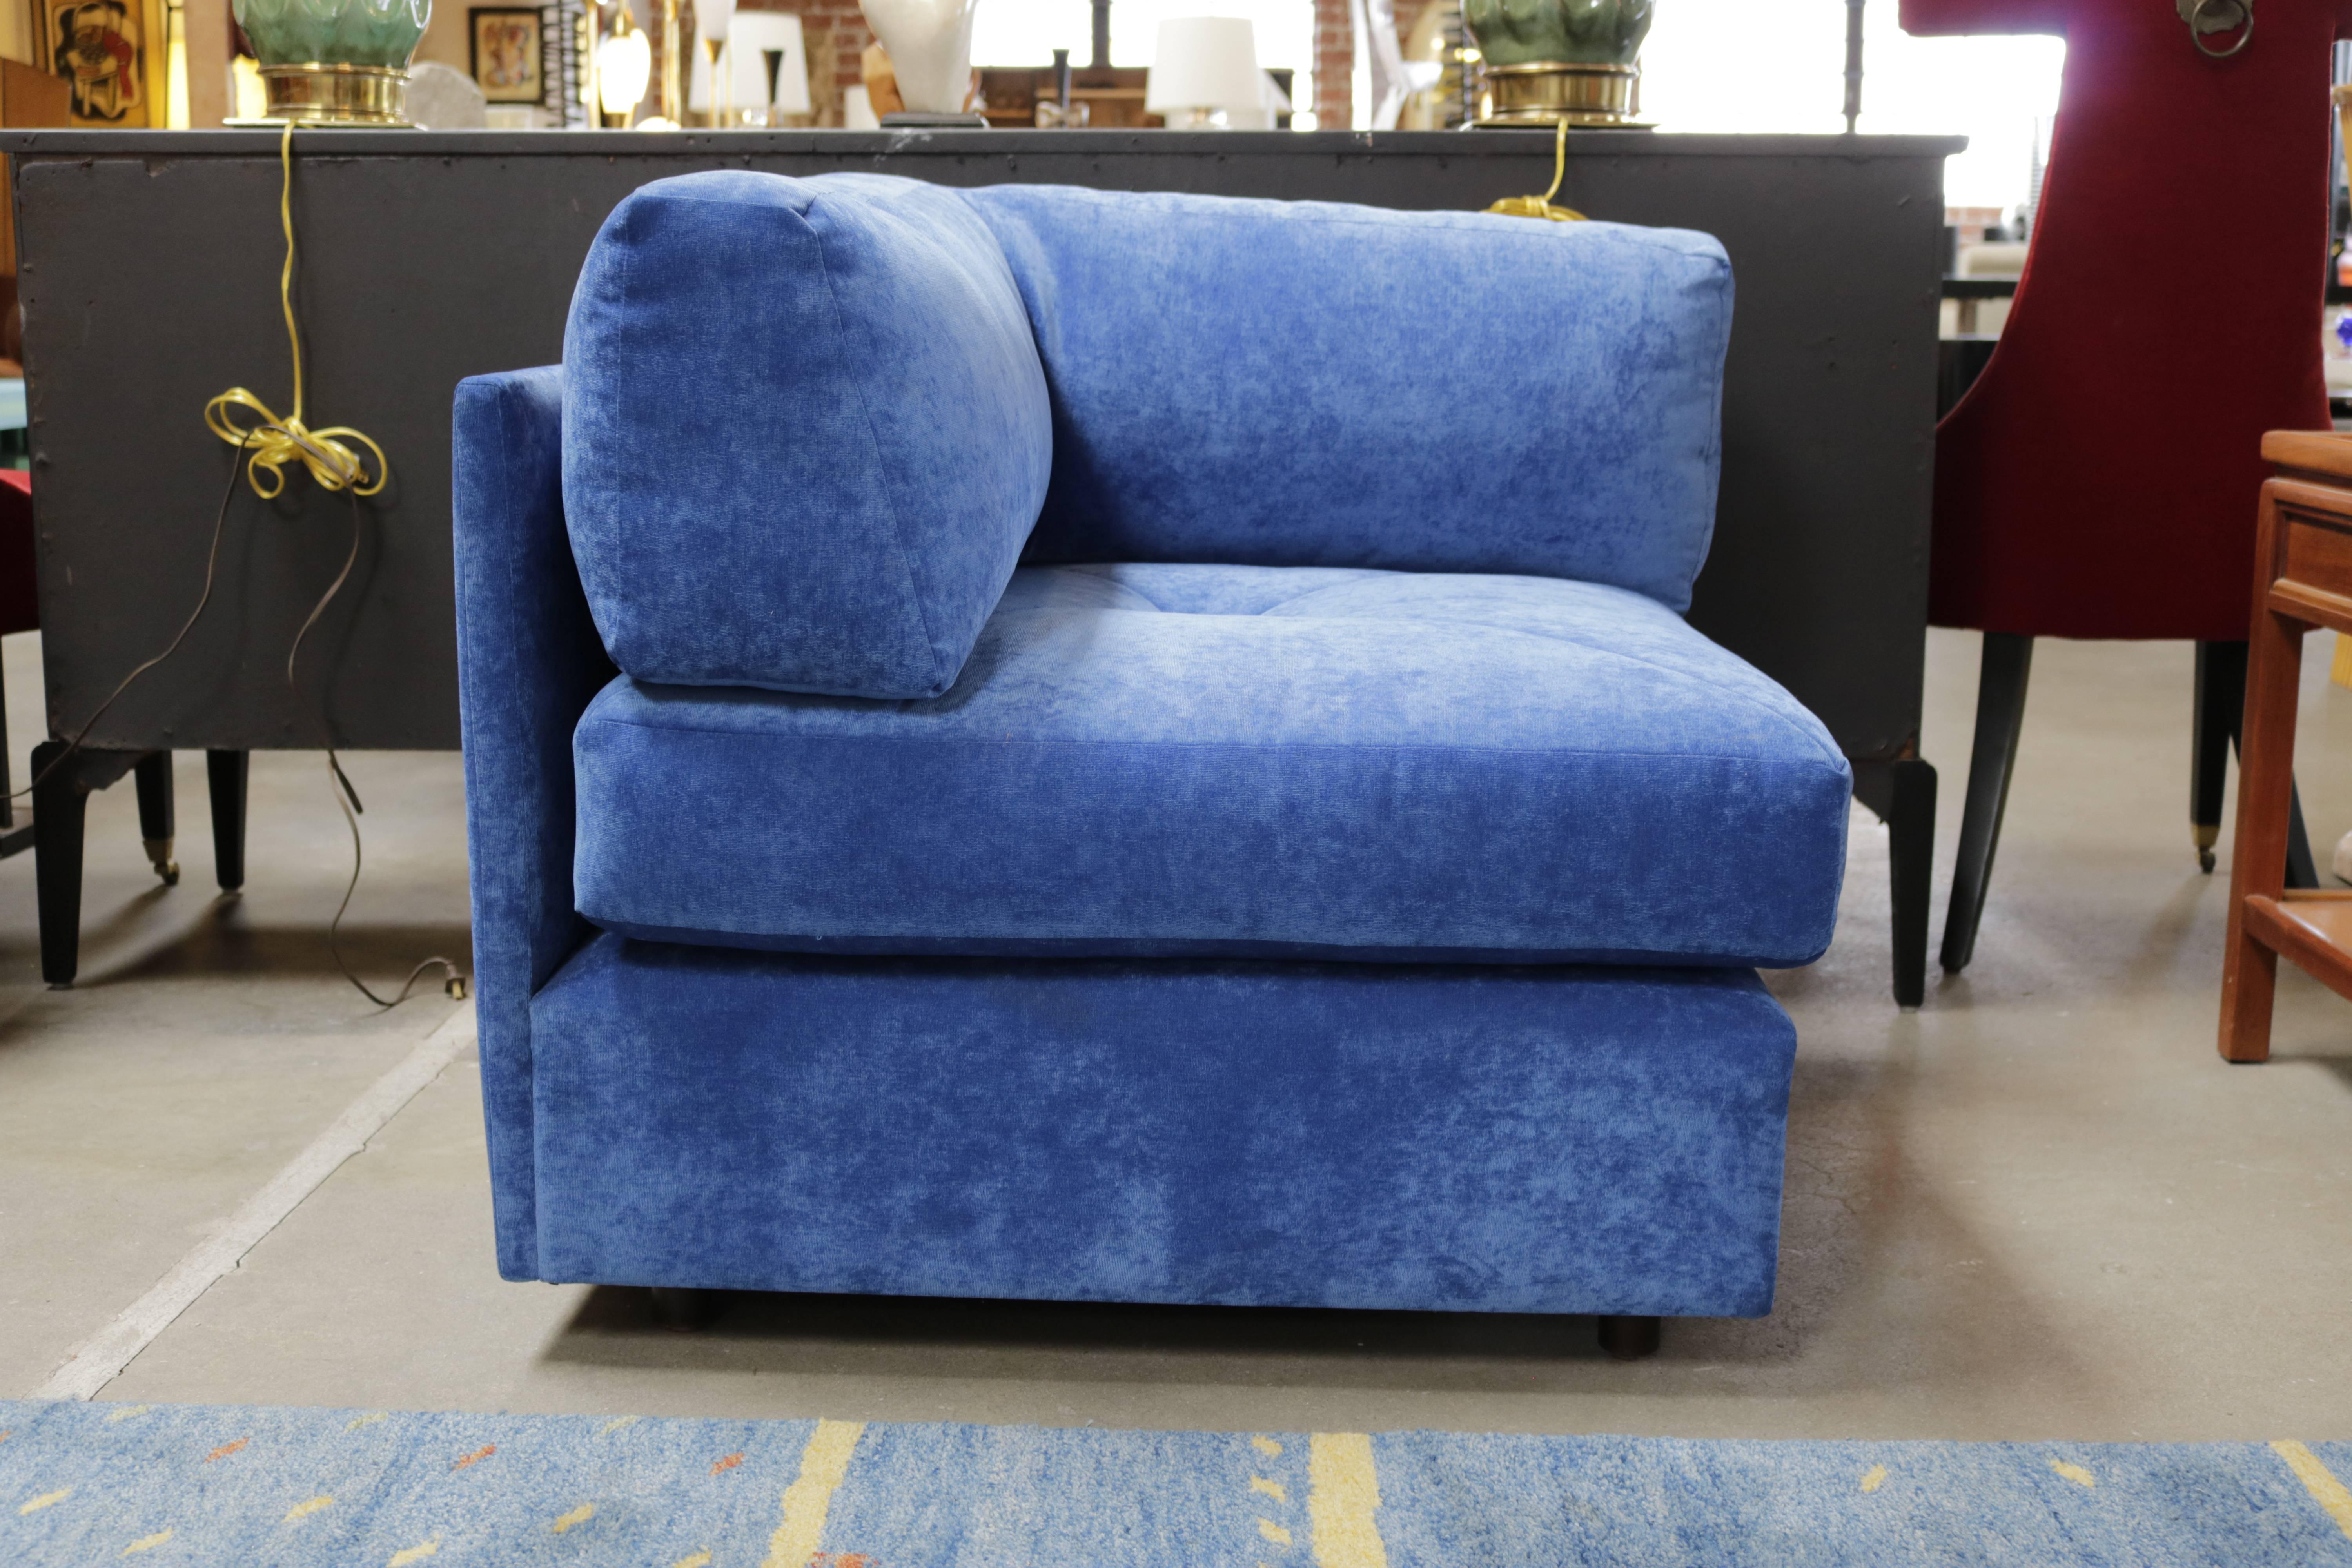 1960s two-piece lounge chair or settee by Milo Baughman, in beautiful blue velvet, on wheels. The ottoman conveniently opens up as storage.
Milo Baughman designed the Articulate collection for James, Inc. of North Carolina, Thayer Coggin's first